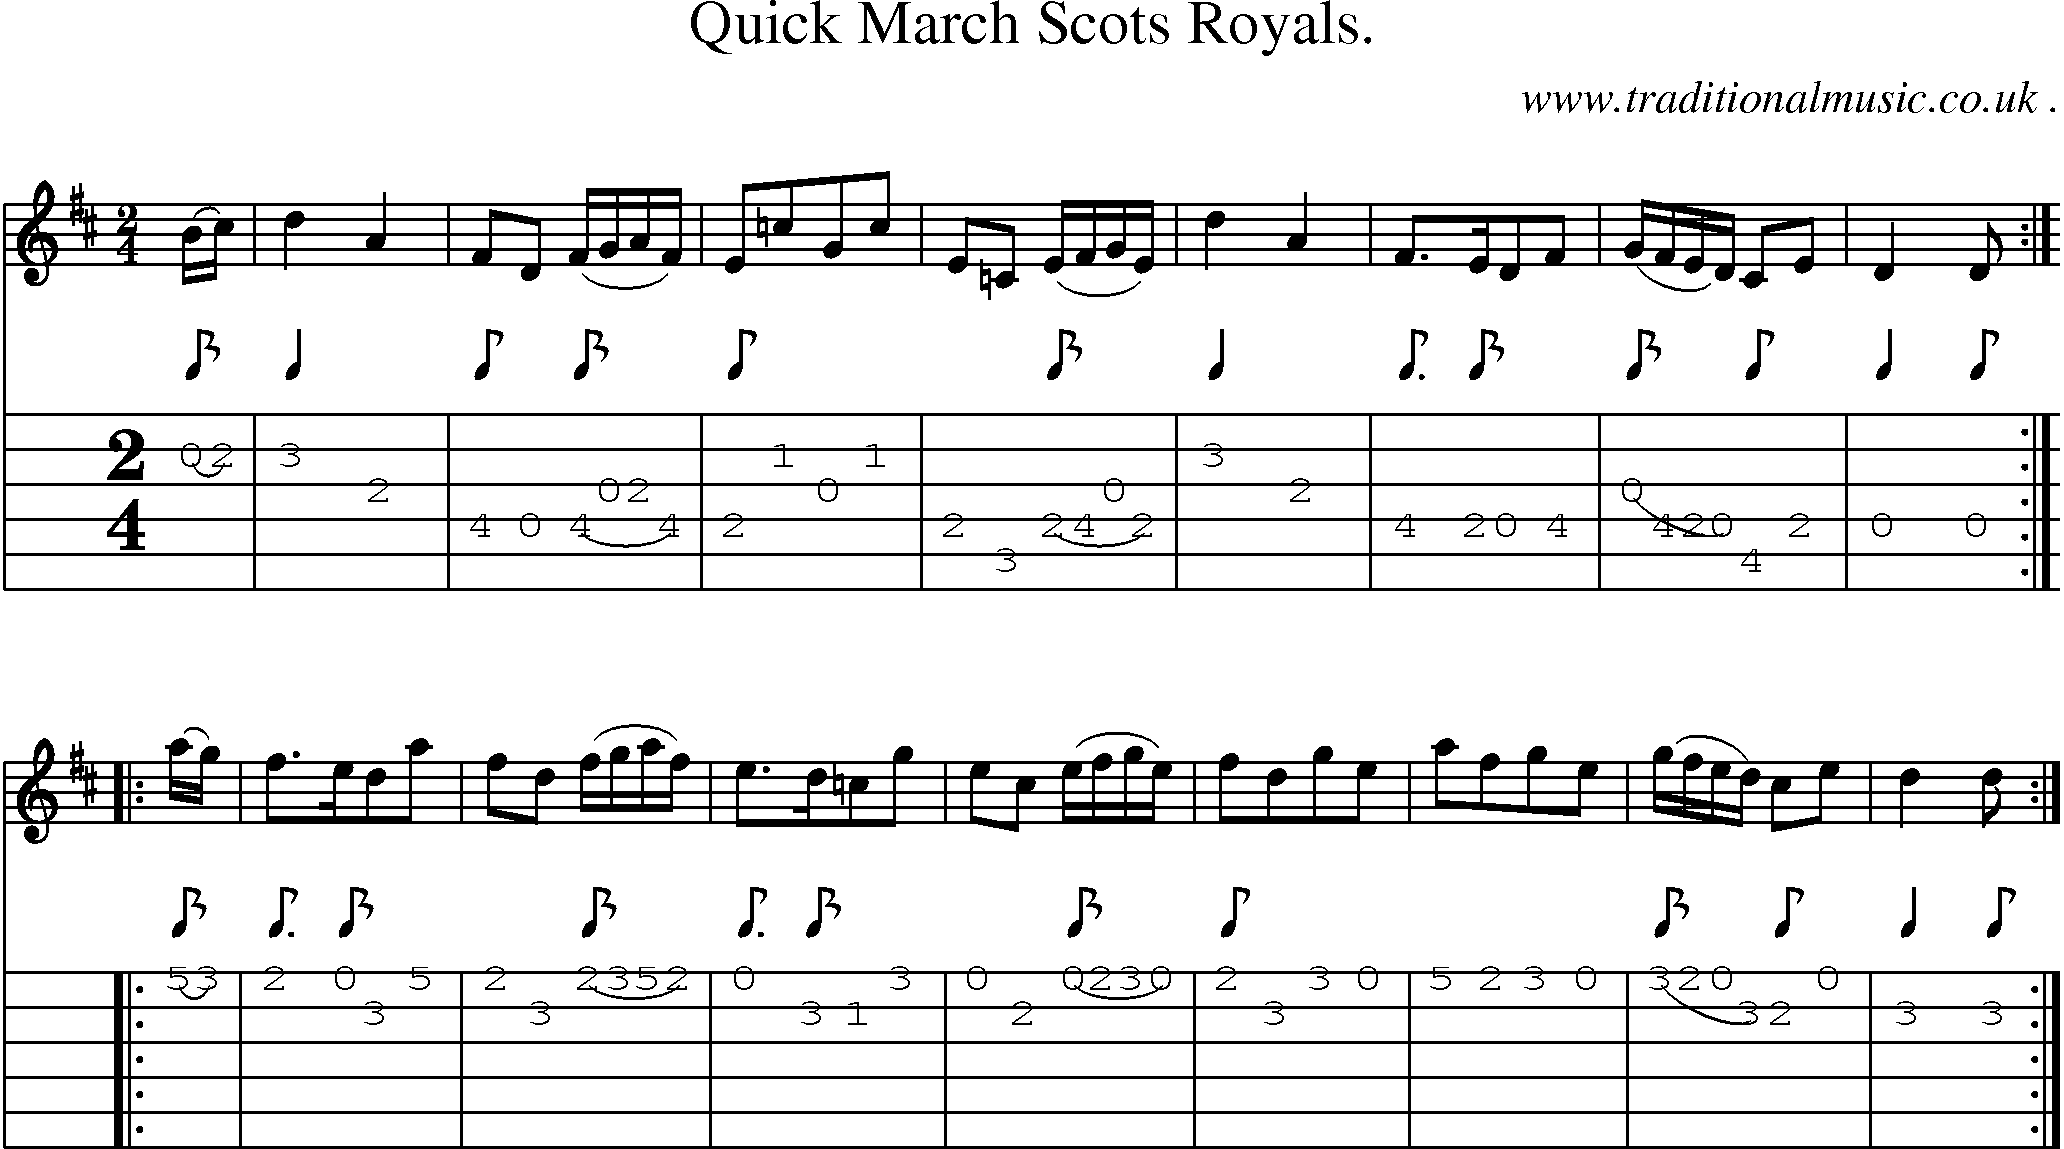 Sheet-Music and Guitar Tabs for Quick March Scots Royals